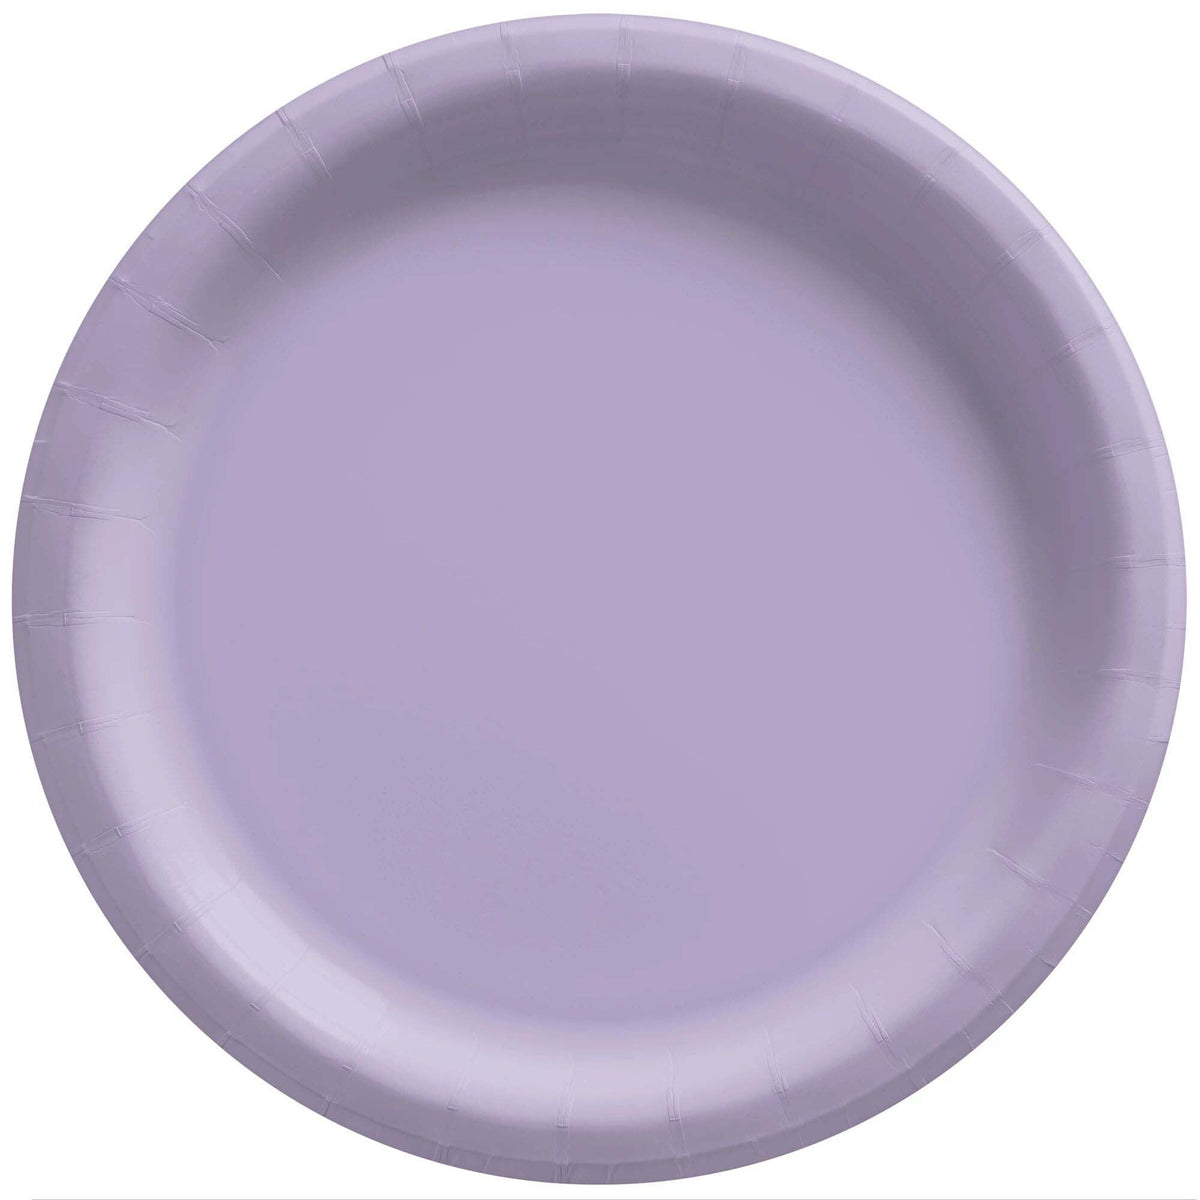 AMSCAN CA Disposable-Plasticware Lavender Round Paper Plates, 7 Inches, 20 Count 192937241493